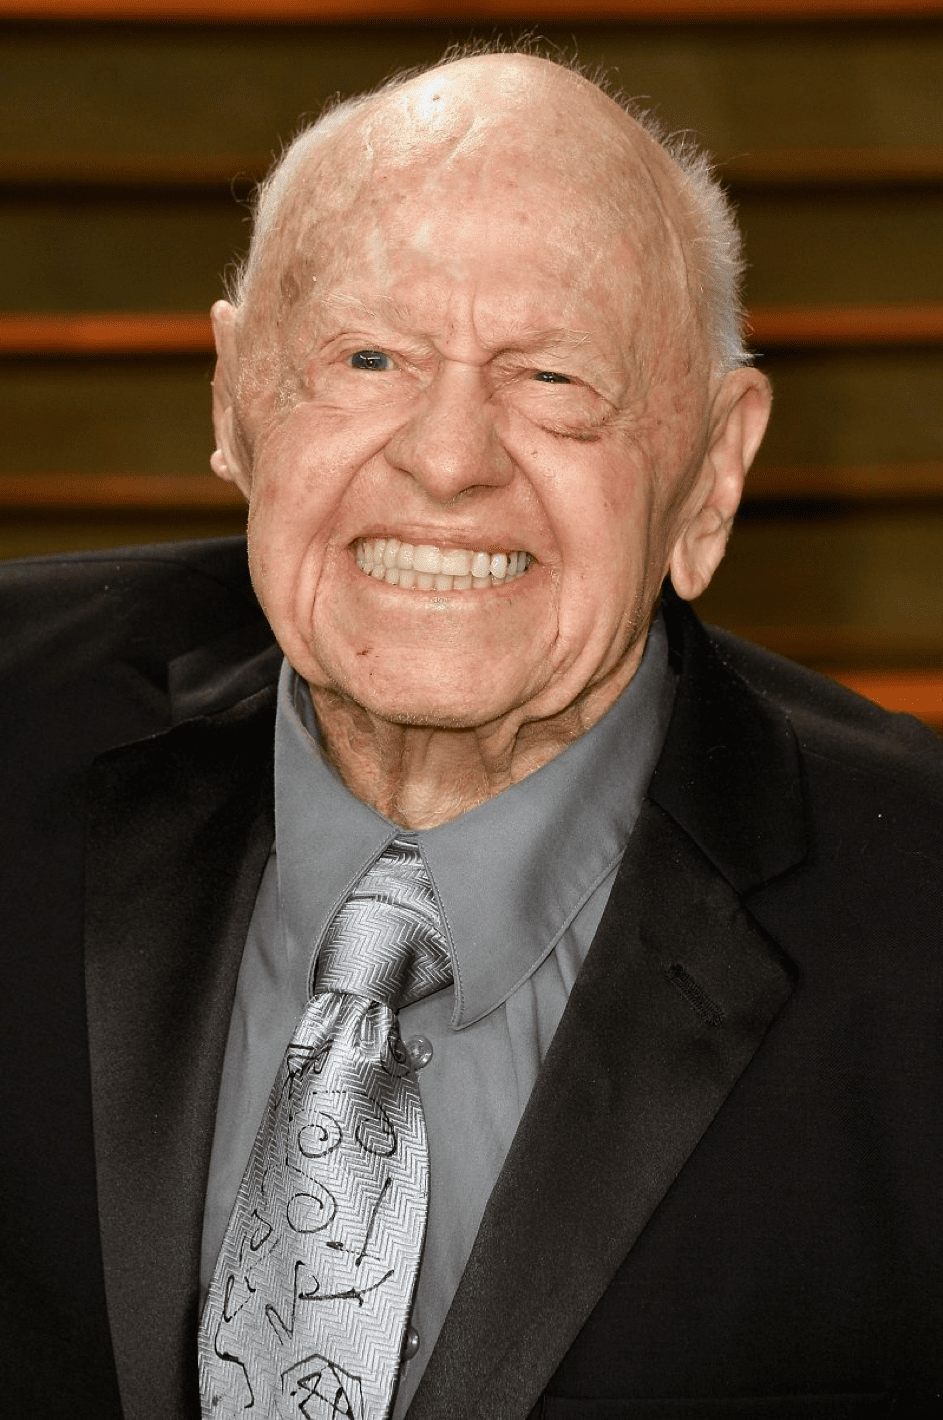 Mickey Rooney am 02.03.04 in West Hollywood. | Quelle: Getty Images